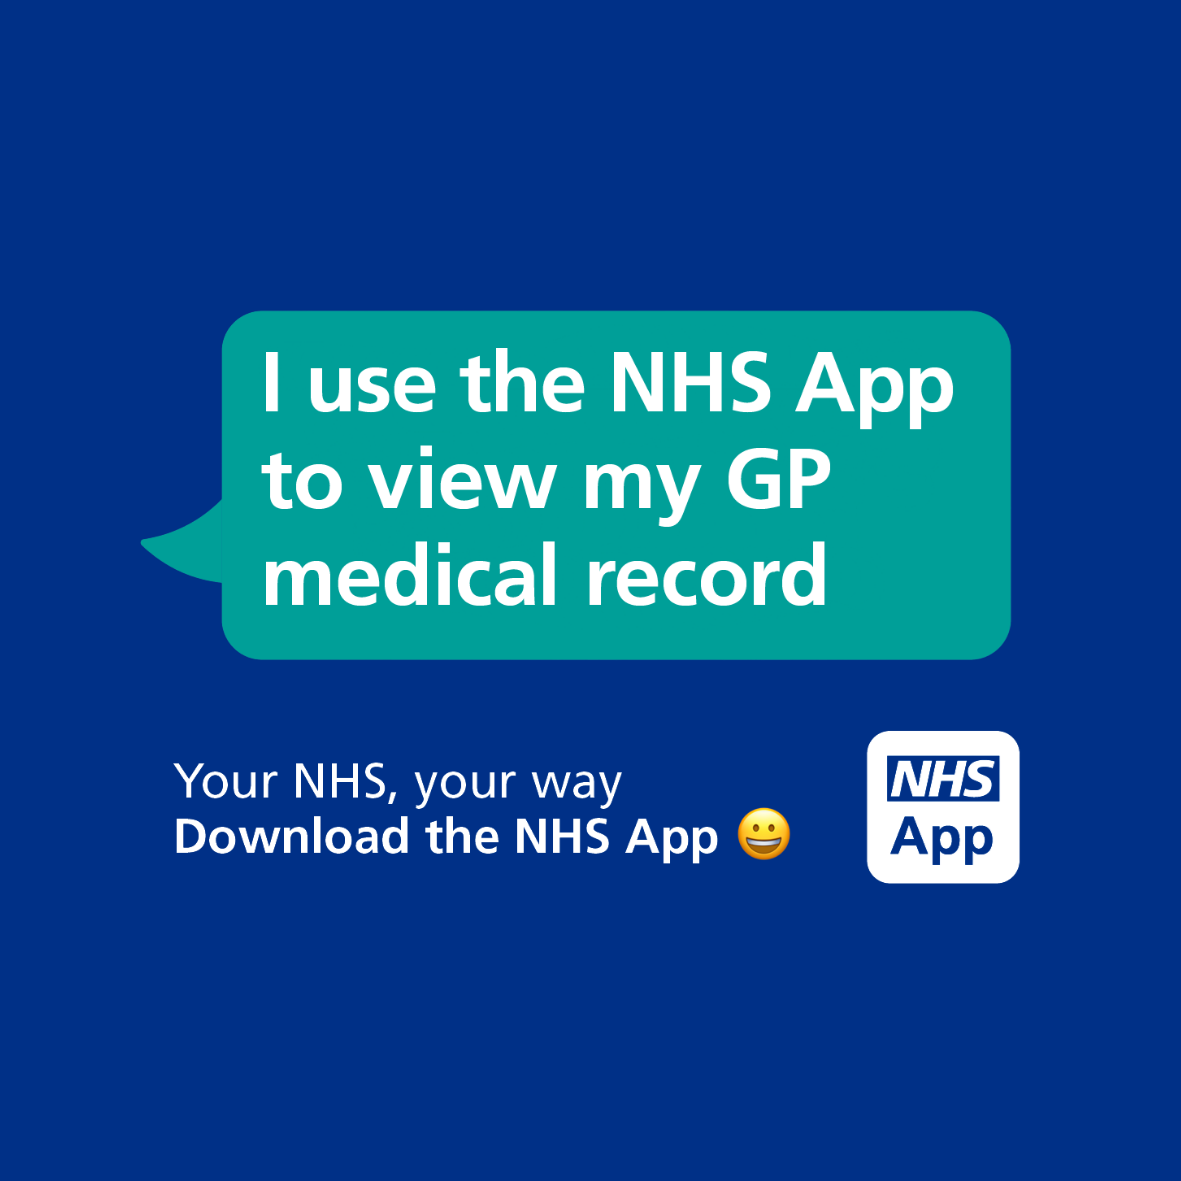 Speech Bubble Saying I Use The NHS App To View My GP Medical Record